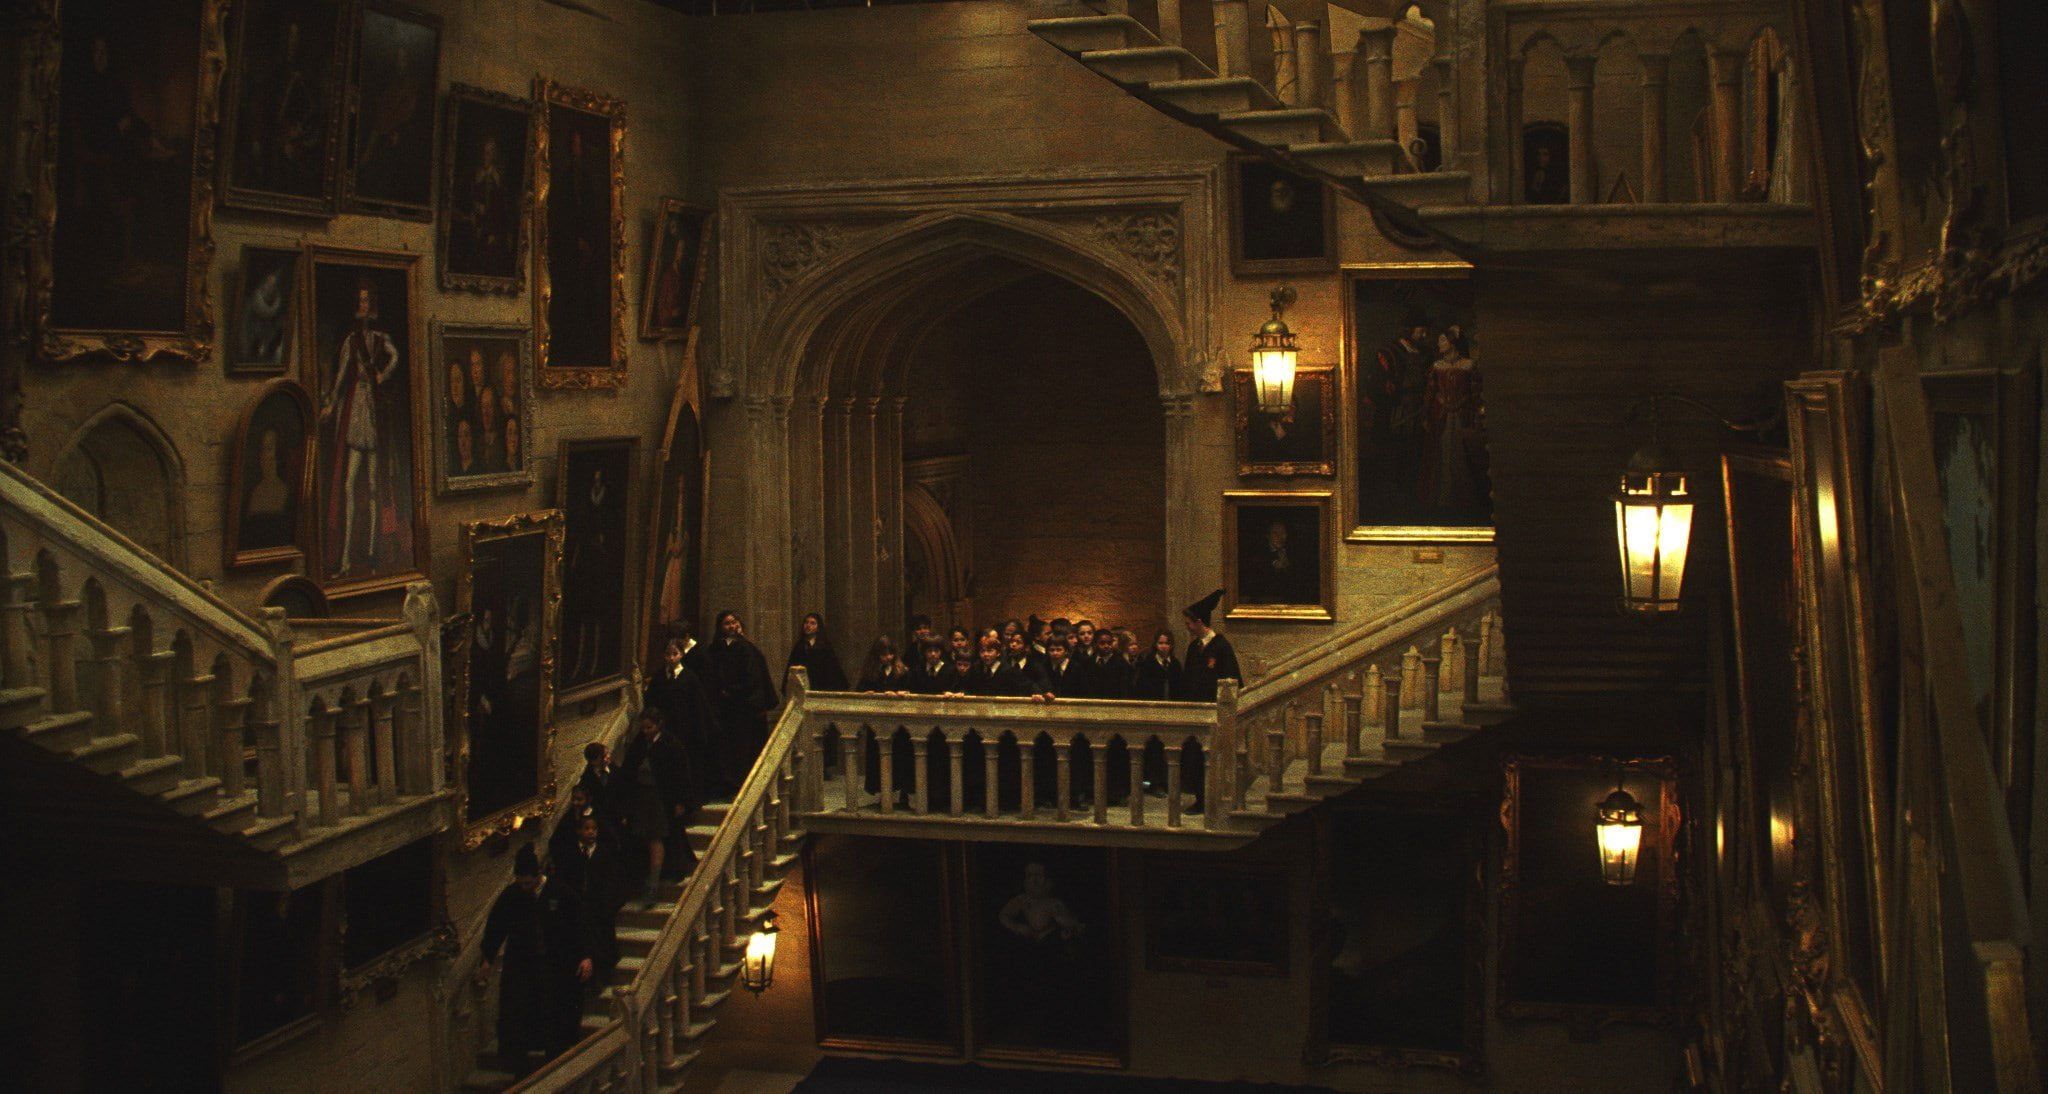 The stairwell of Hogwarts castle in Harry Potter and the Sorcerer's Stone. - Harry Potter, architecture